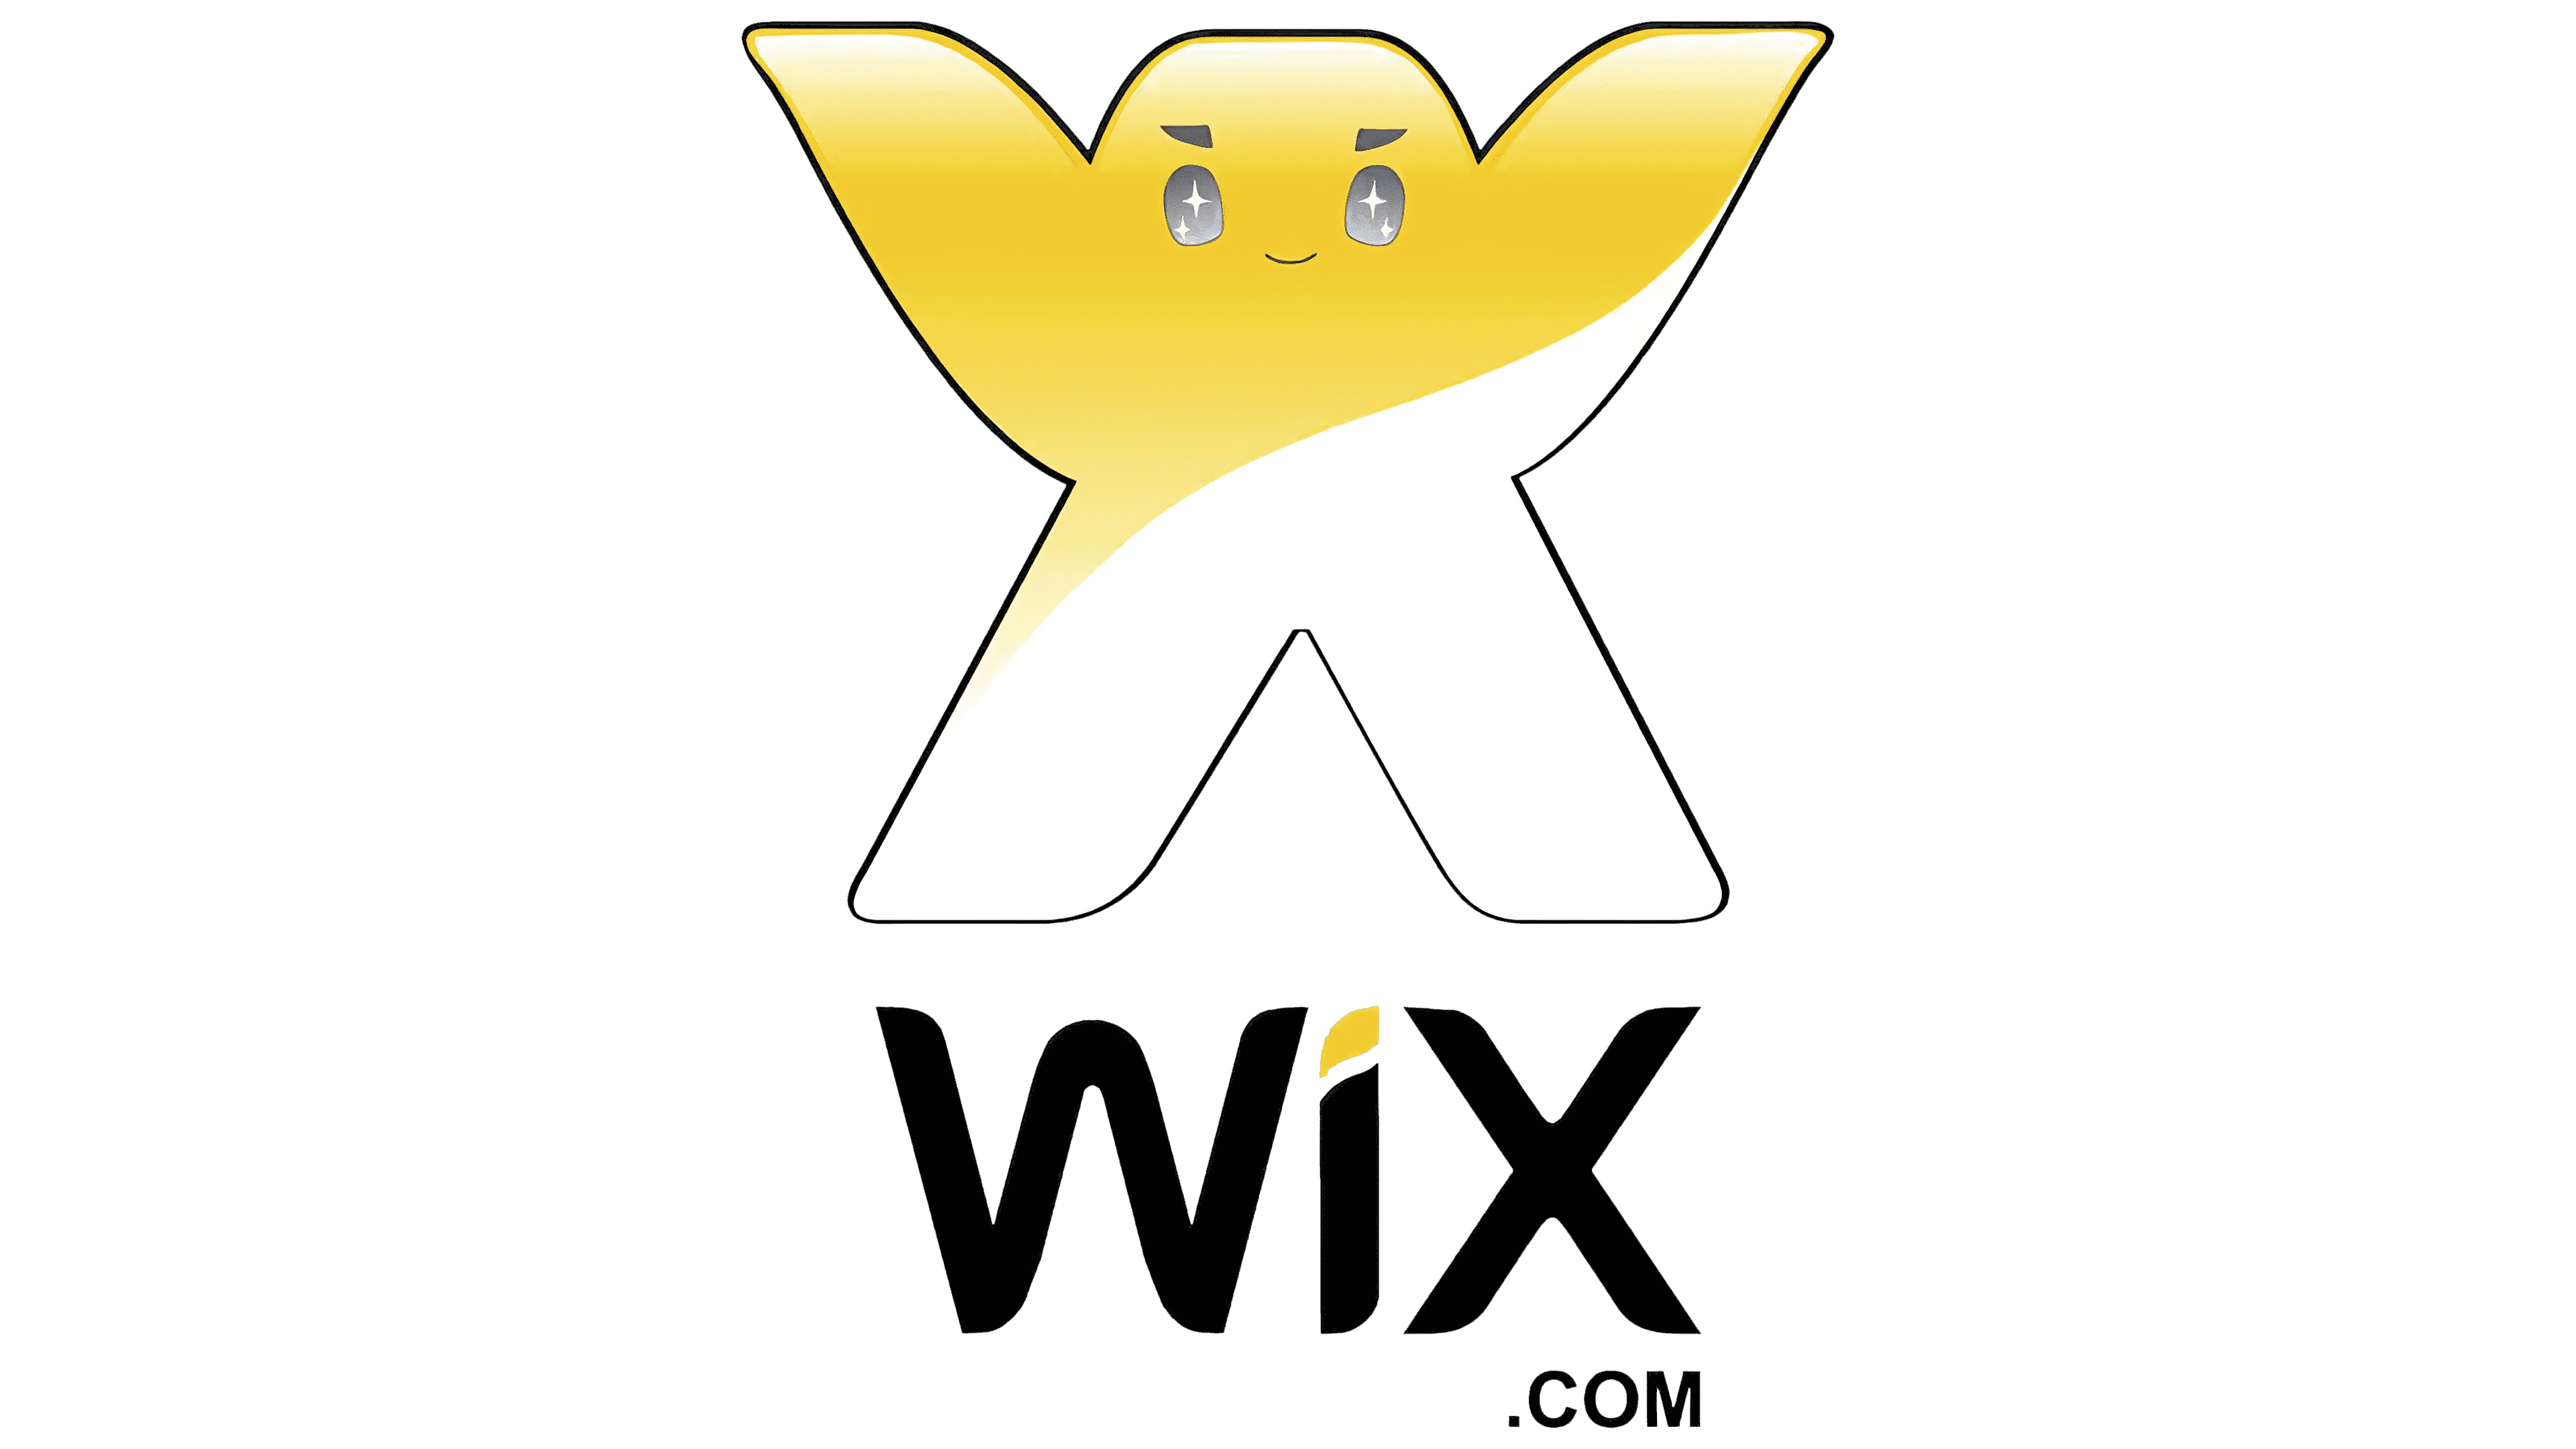 wix-logo-symbol-meaning-history-png-brand